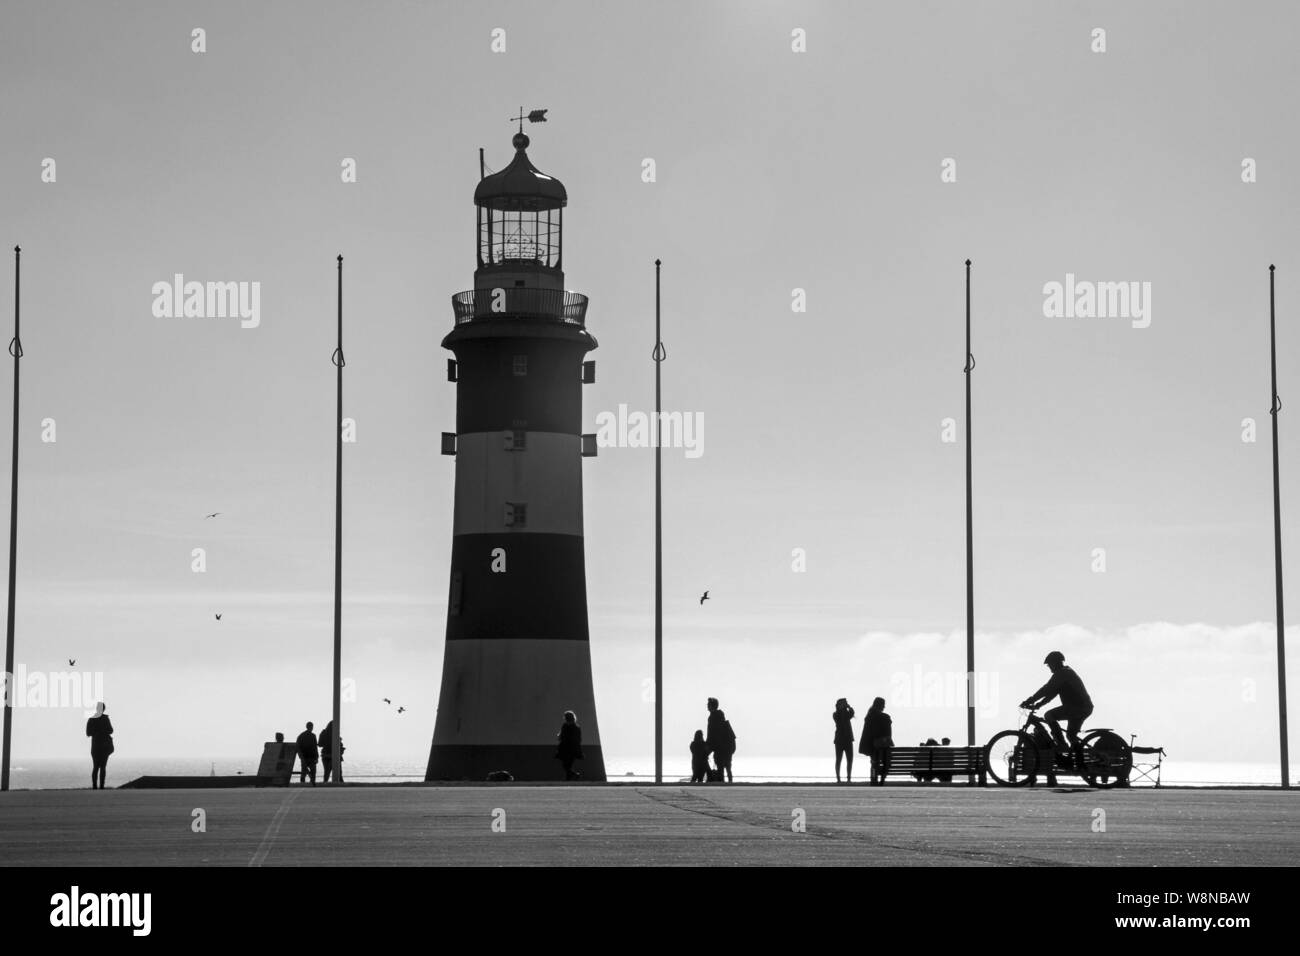 Smeaton’s Tower on Plymouth Hoe with silhouettes of pedestrians, visitors and a cyclist Stock Photo